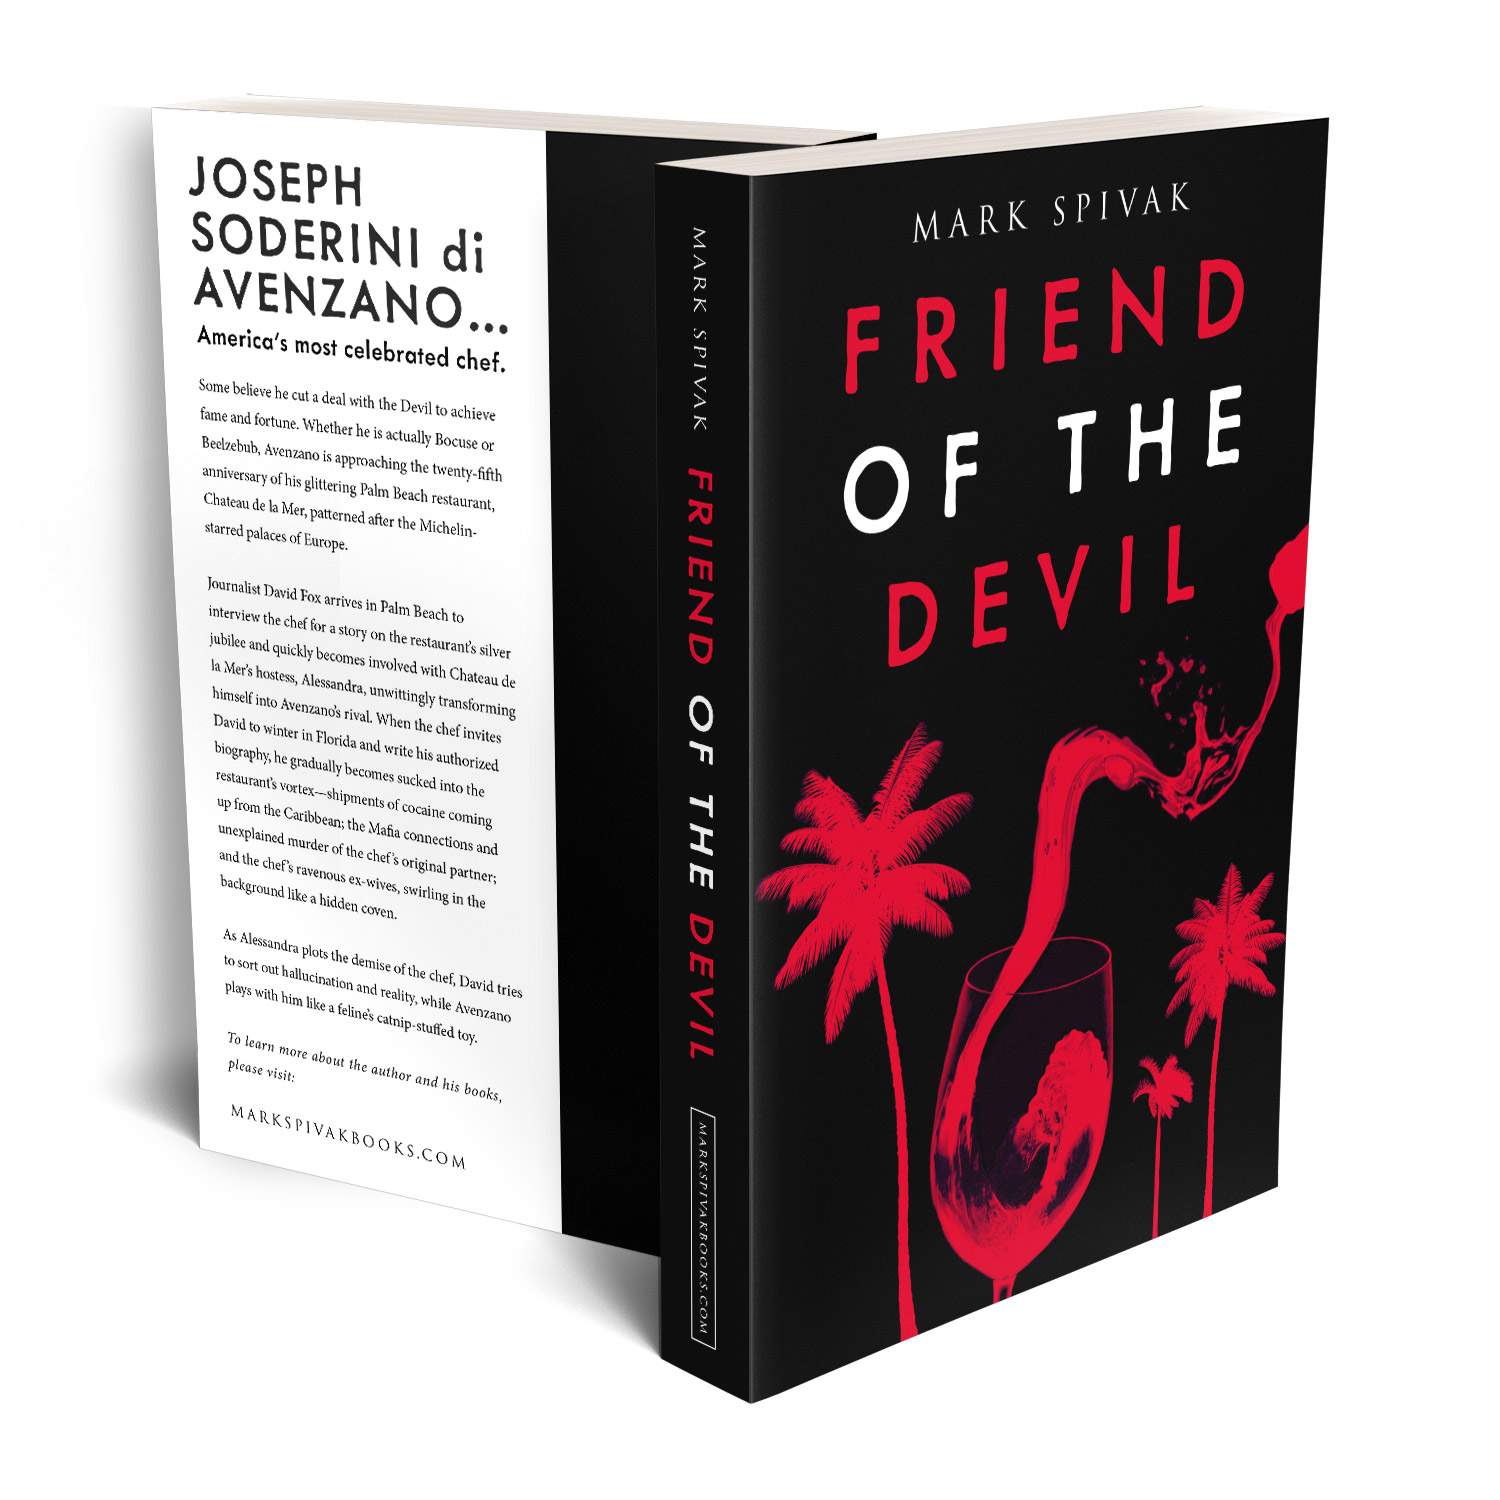 'Friend of the Devil' is a delicious tale of greed. The author is Mark Spivak. The cover design of the book is by Mark Thomas. To learn more about what Mark could do for your book, please visit coverness.com